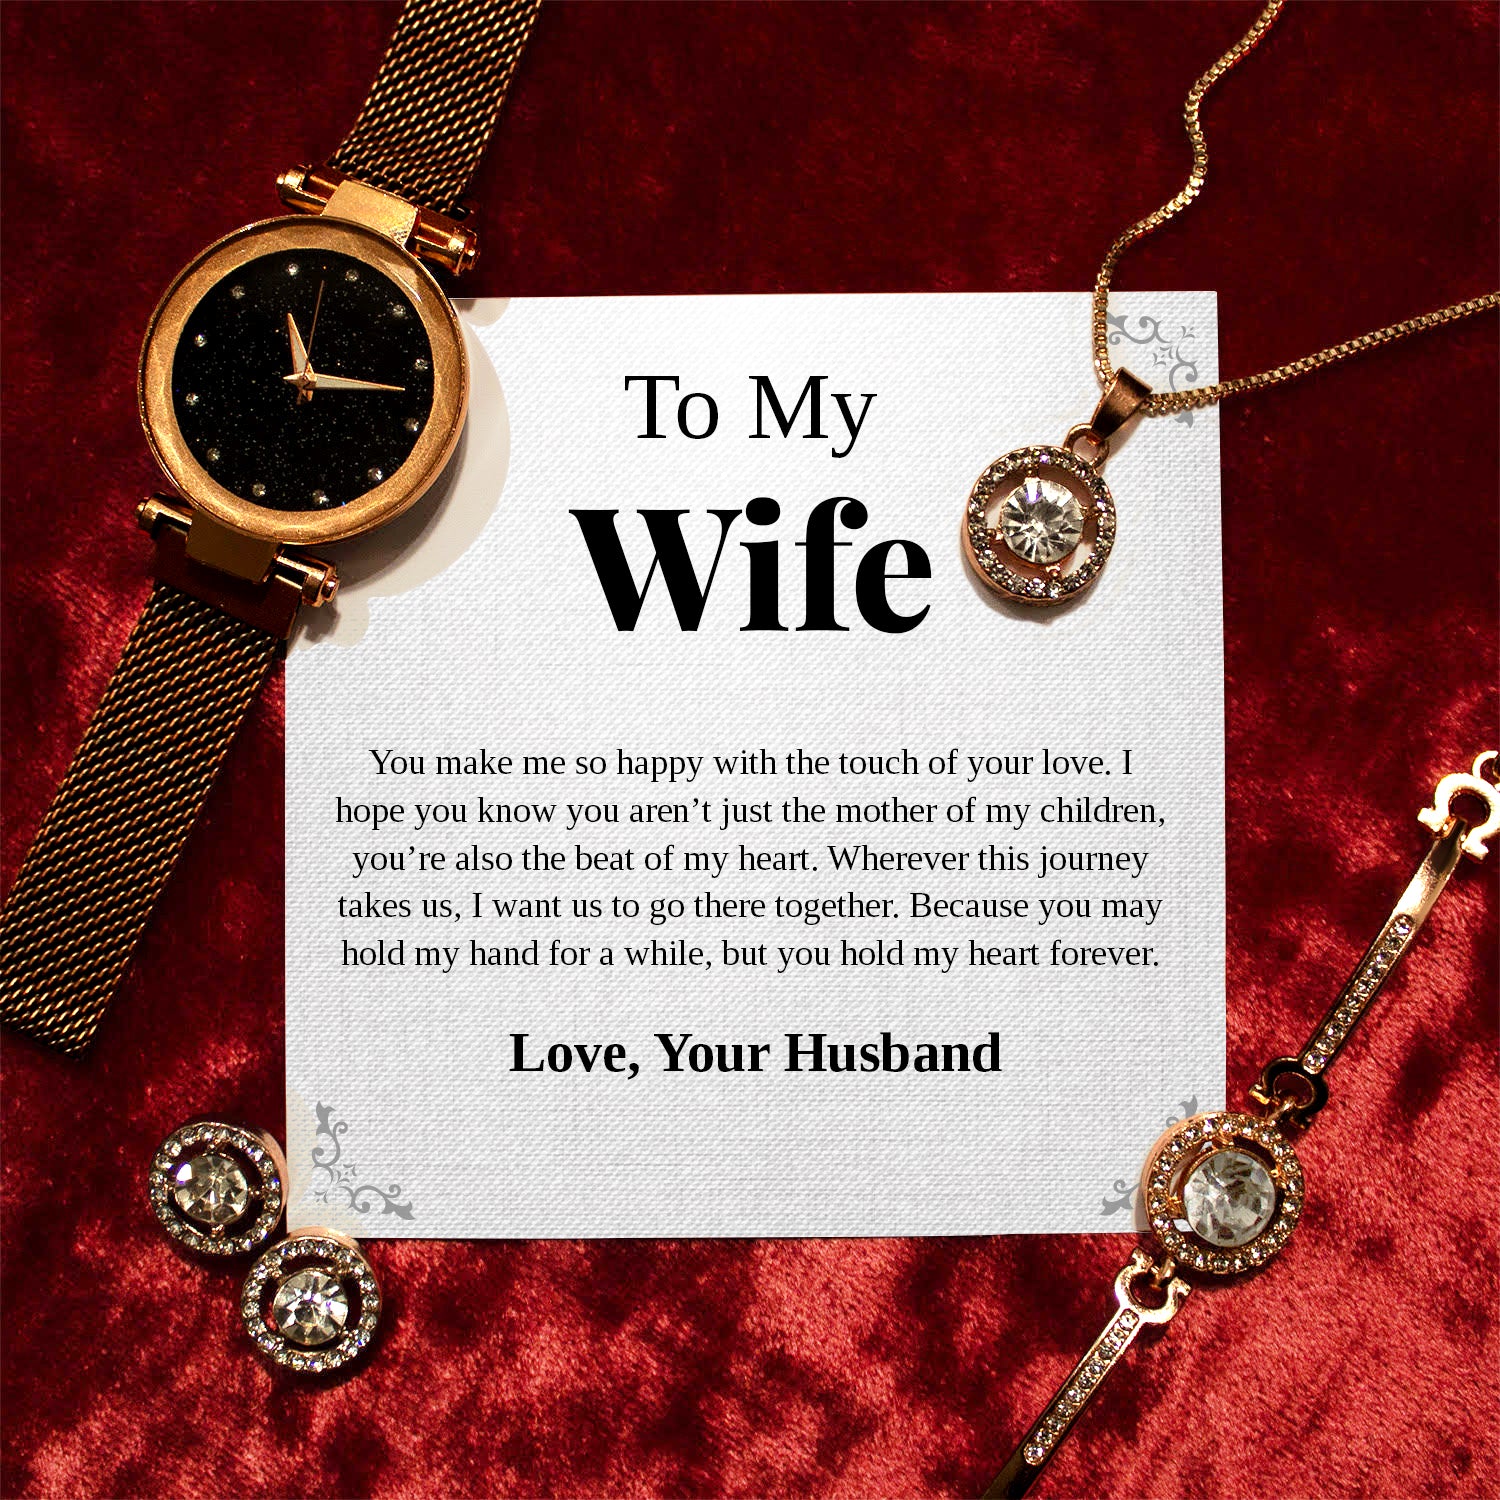 To My Wife | "Touch of Your Love" | Cosmopolitan Set